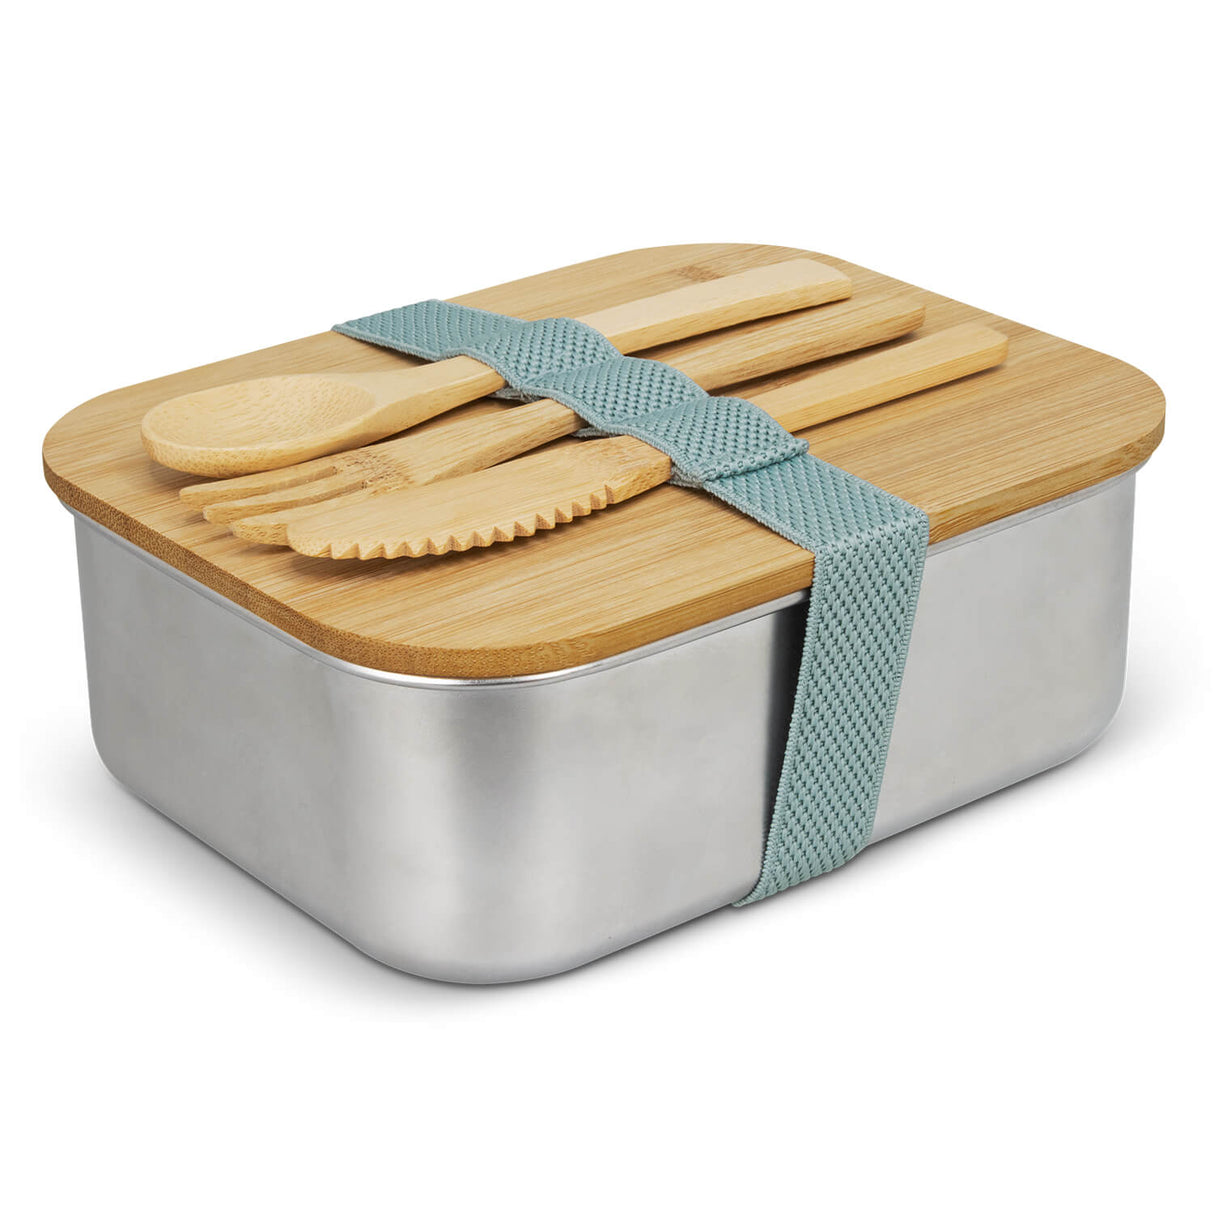 Stainless Steel Bamboo Lunch Box - Printed